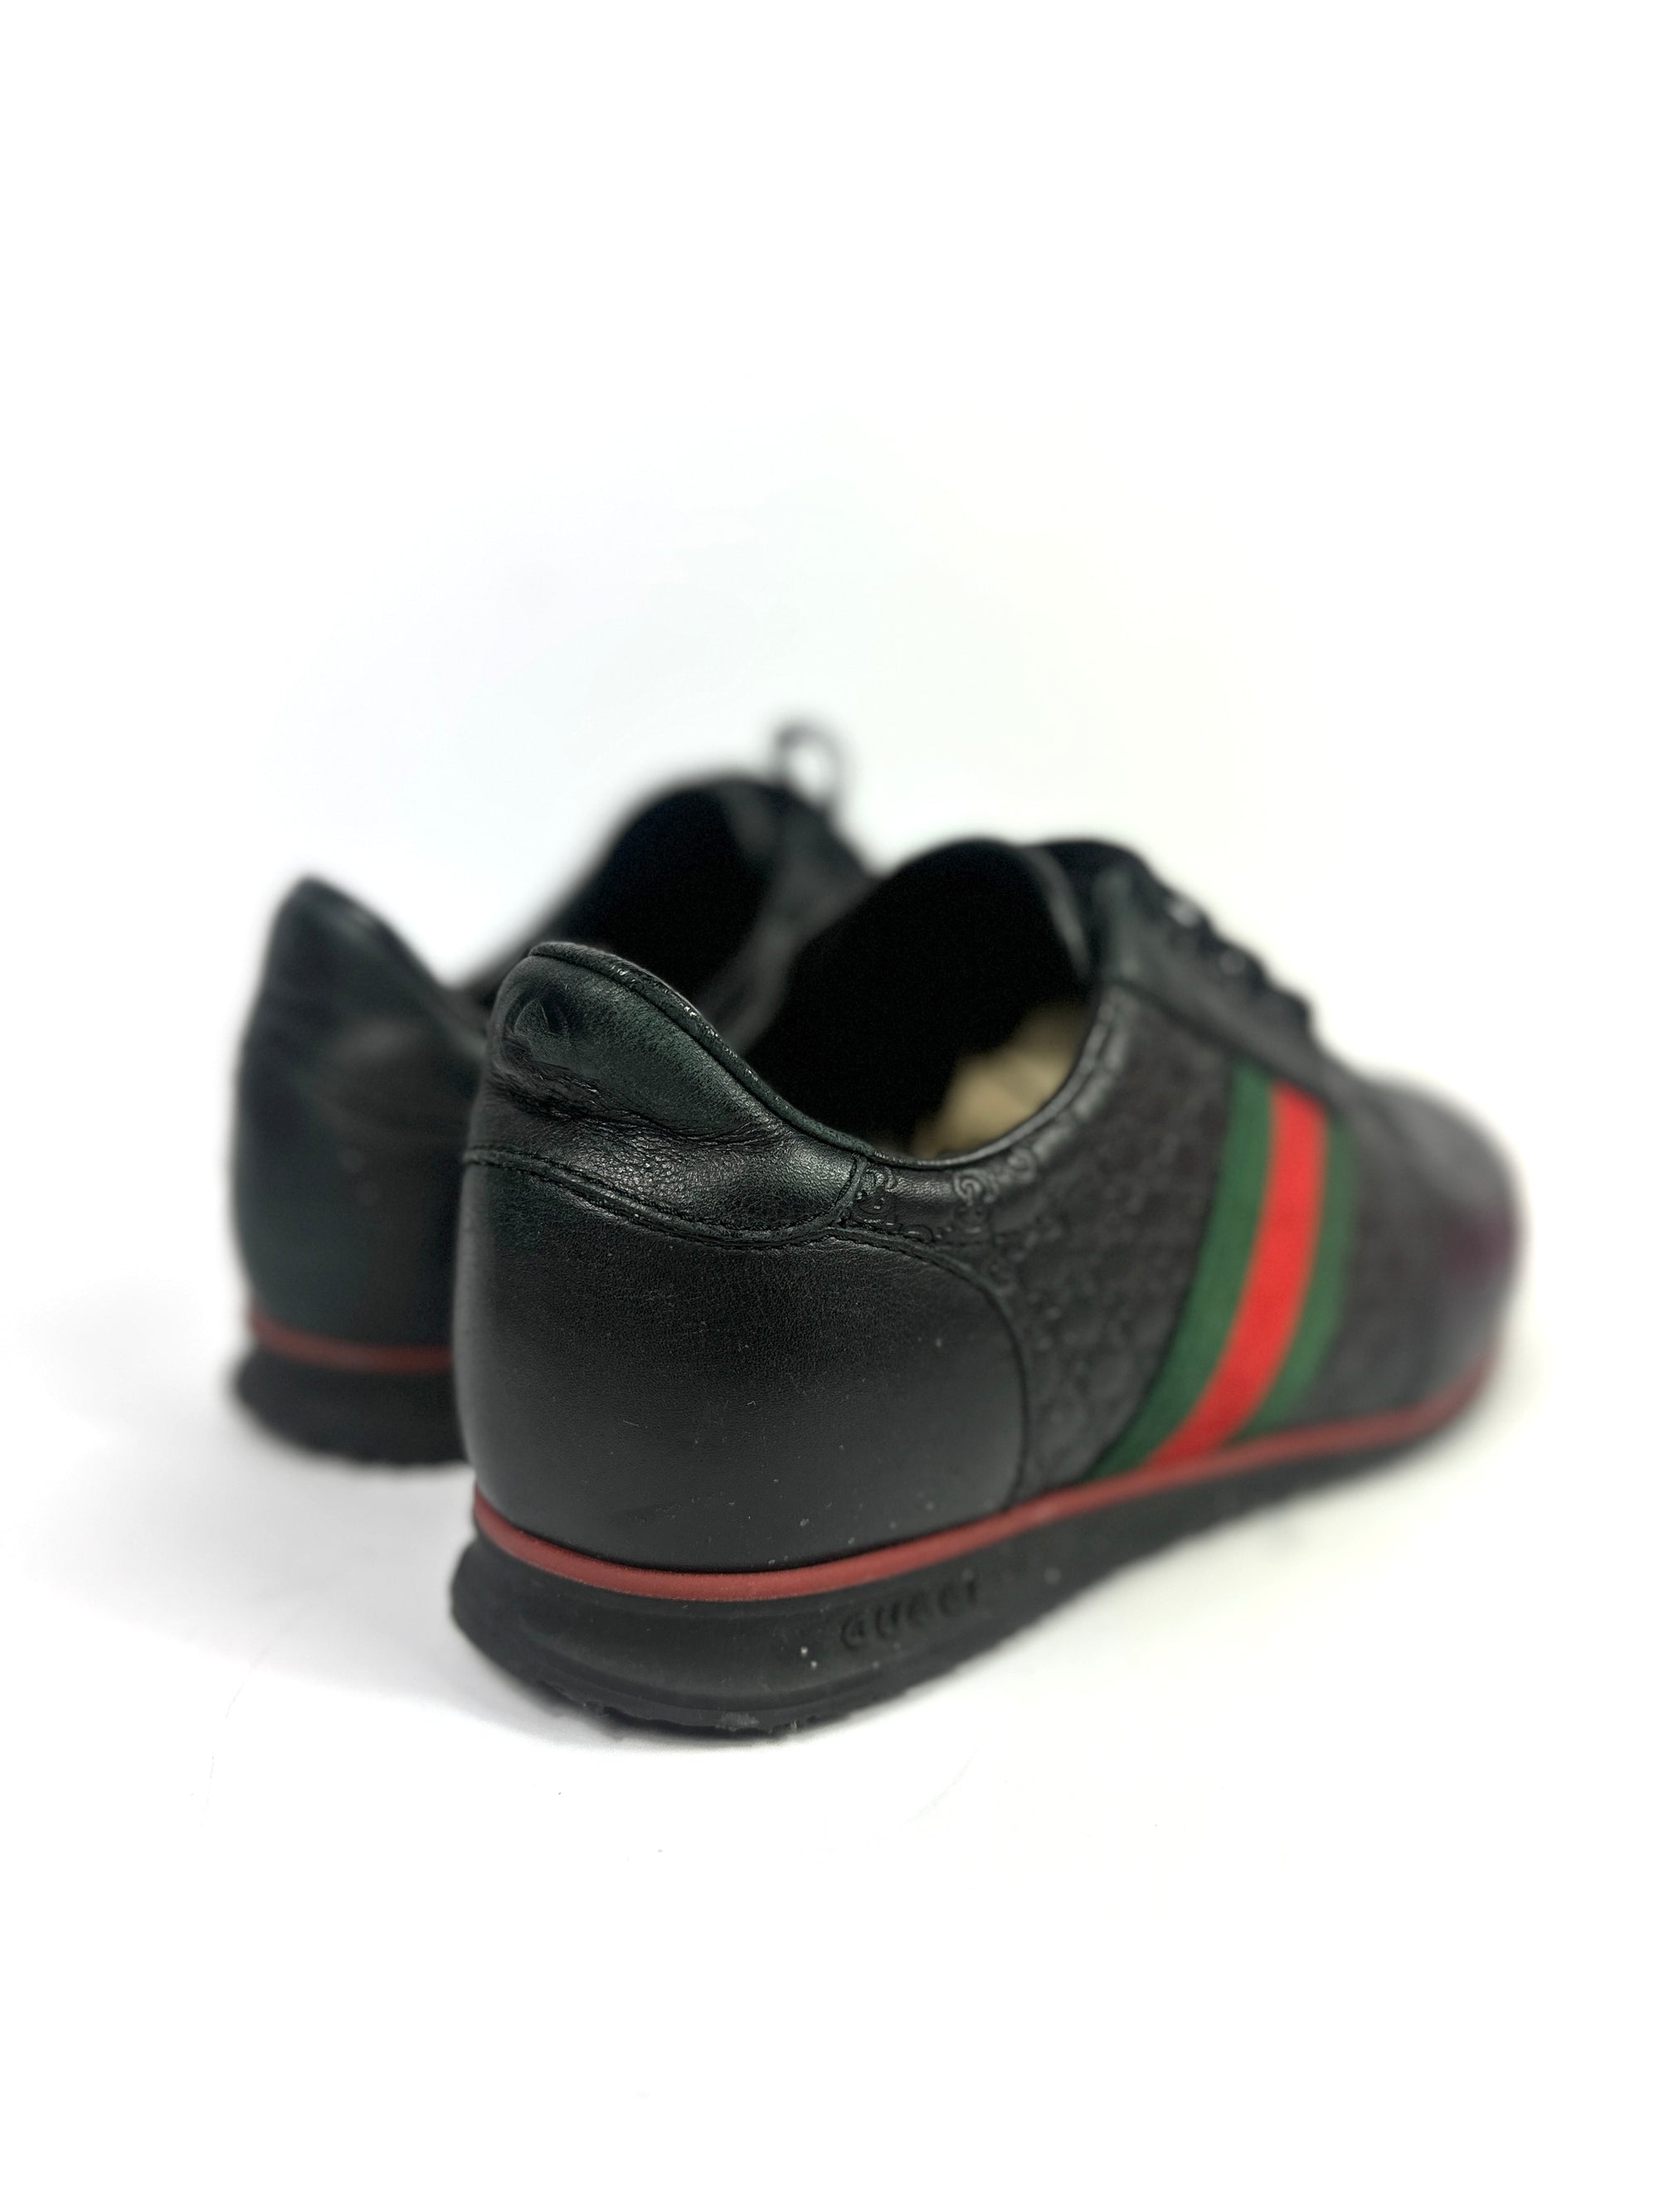 Gucci Trainers